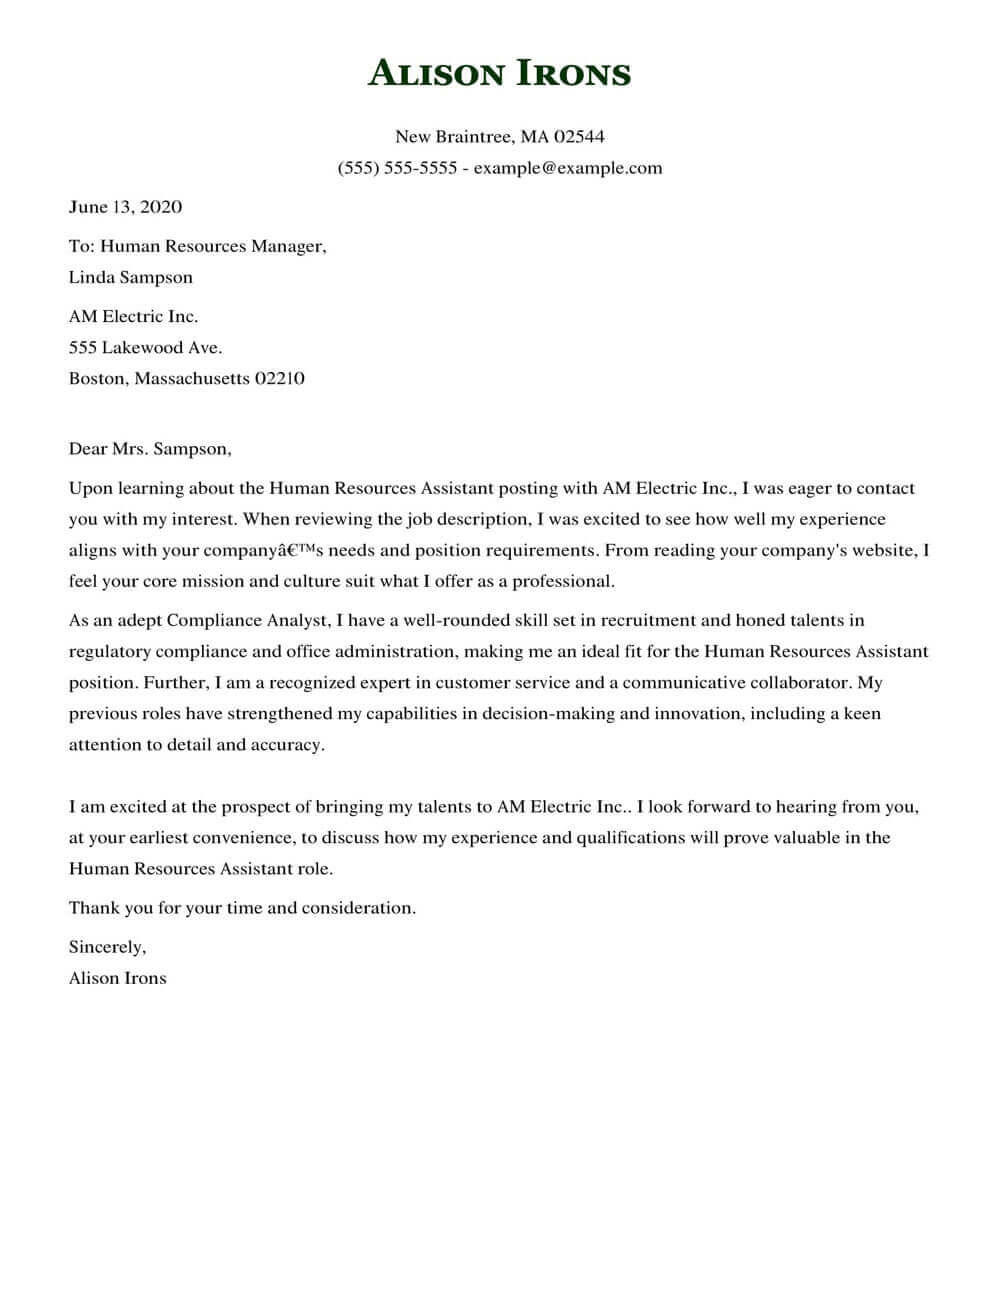 Human Resource Cover Letter Examples from www.jobhero.com